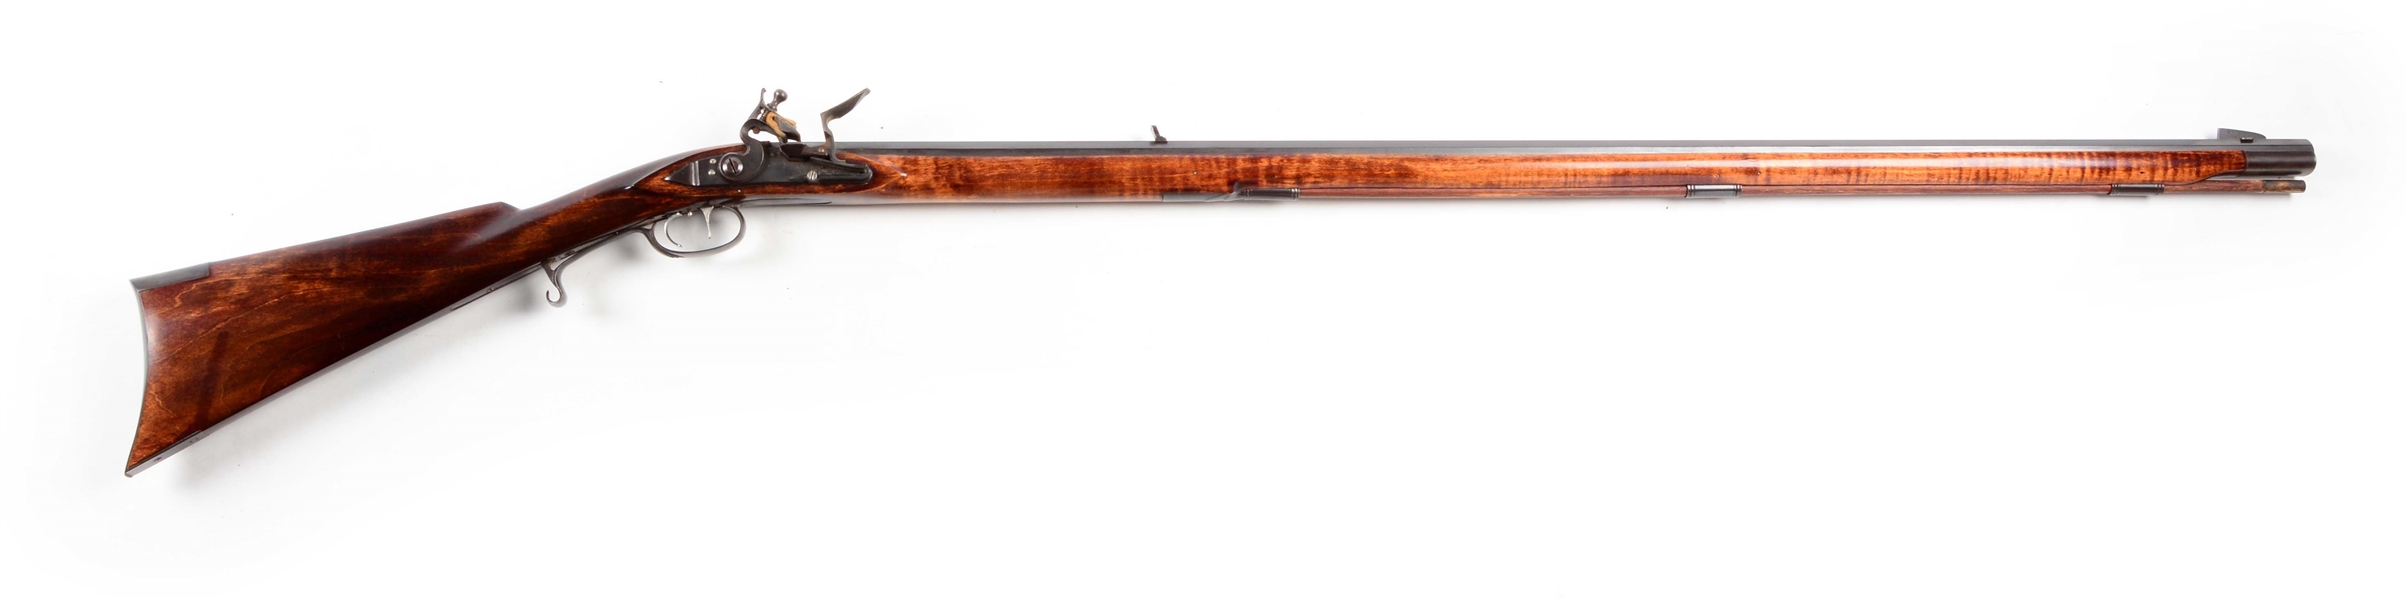 (A) CONTEMPORARY TENNESSEE STYLE FLINTLOCK RIFLE BY M. AVANCE.